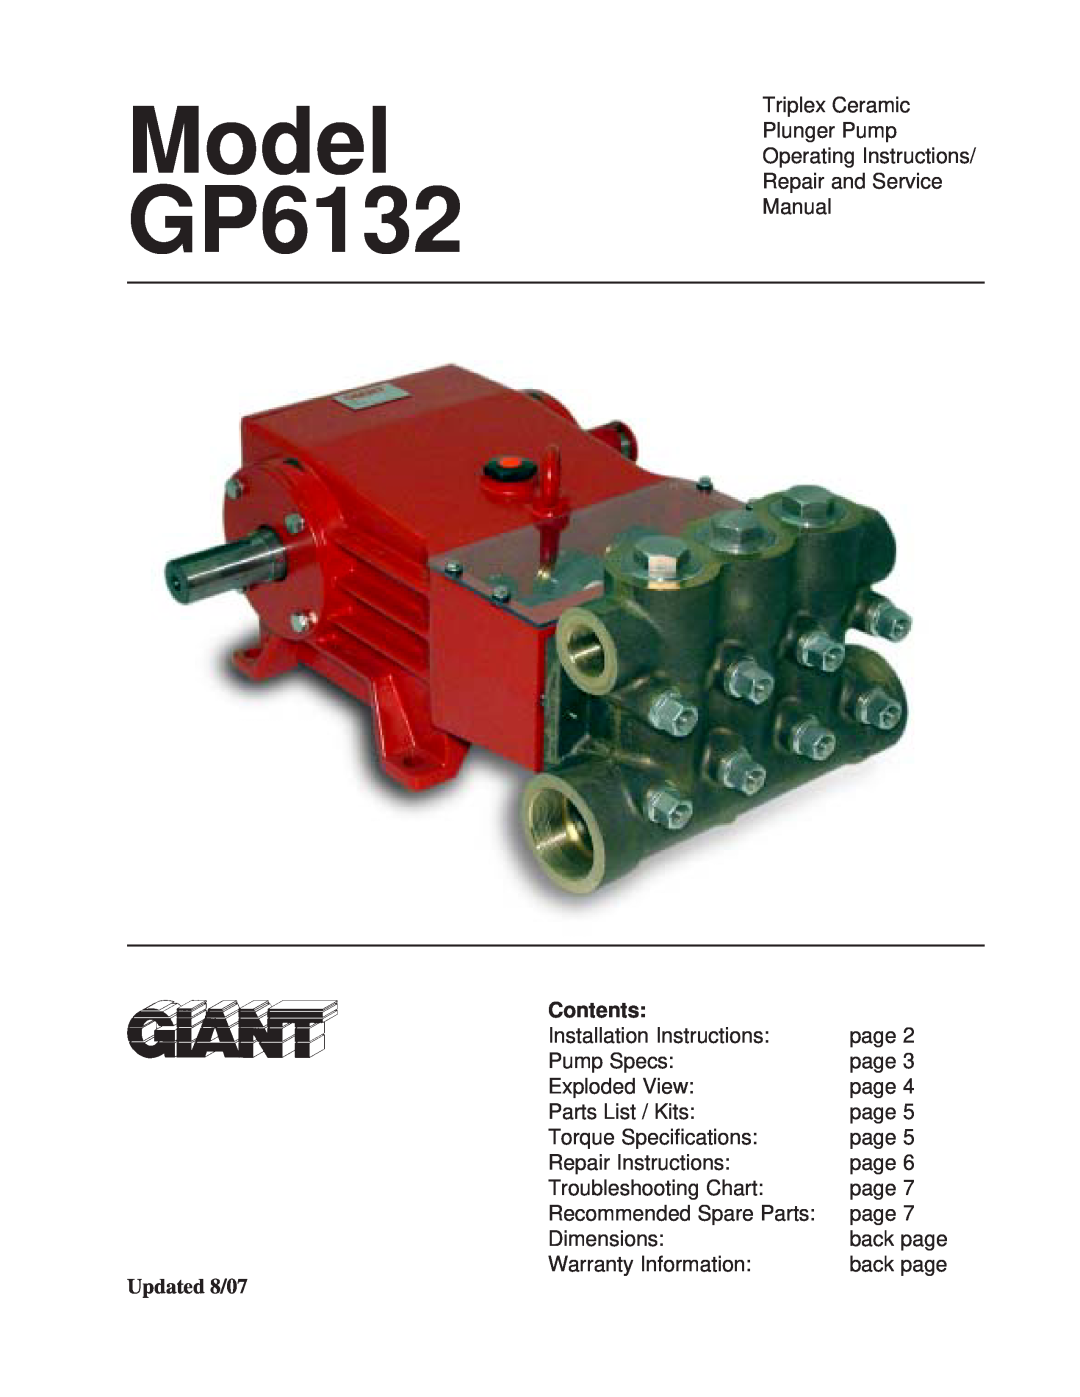 Giant installation instructions Contents, Updated 8/07, Model GP6132 